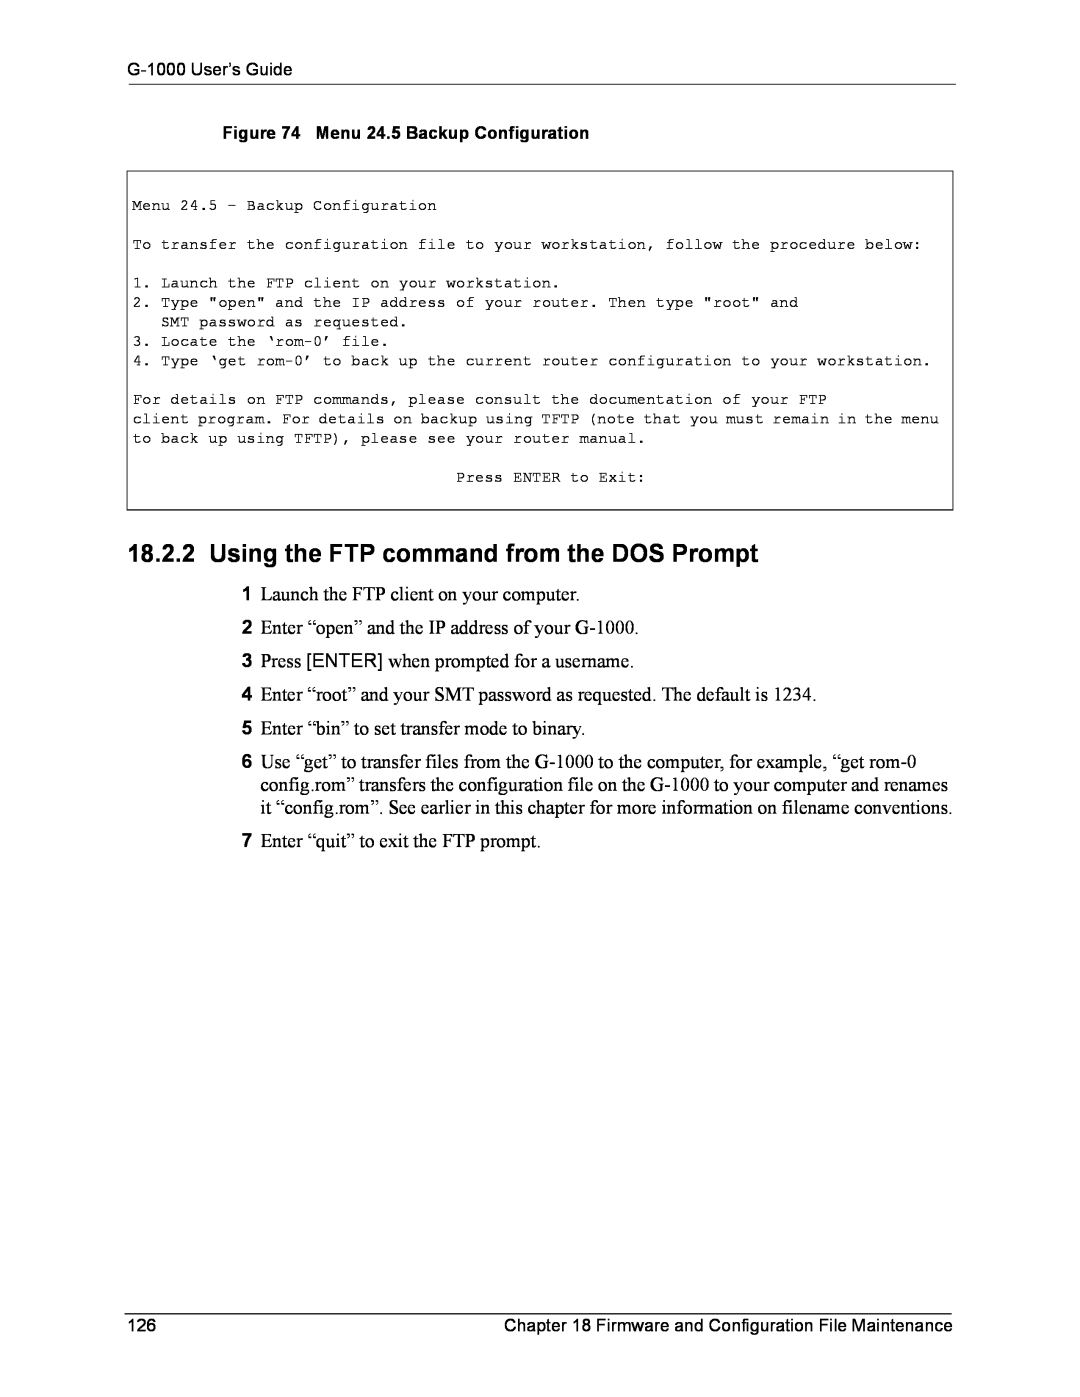 ZyXEL Communications G-1000 manual Using the FTP command from the DOS Prompt 